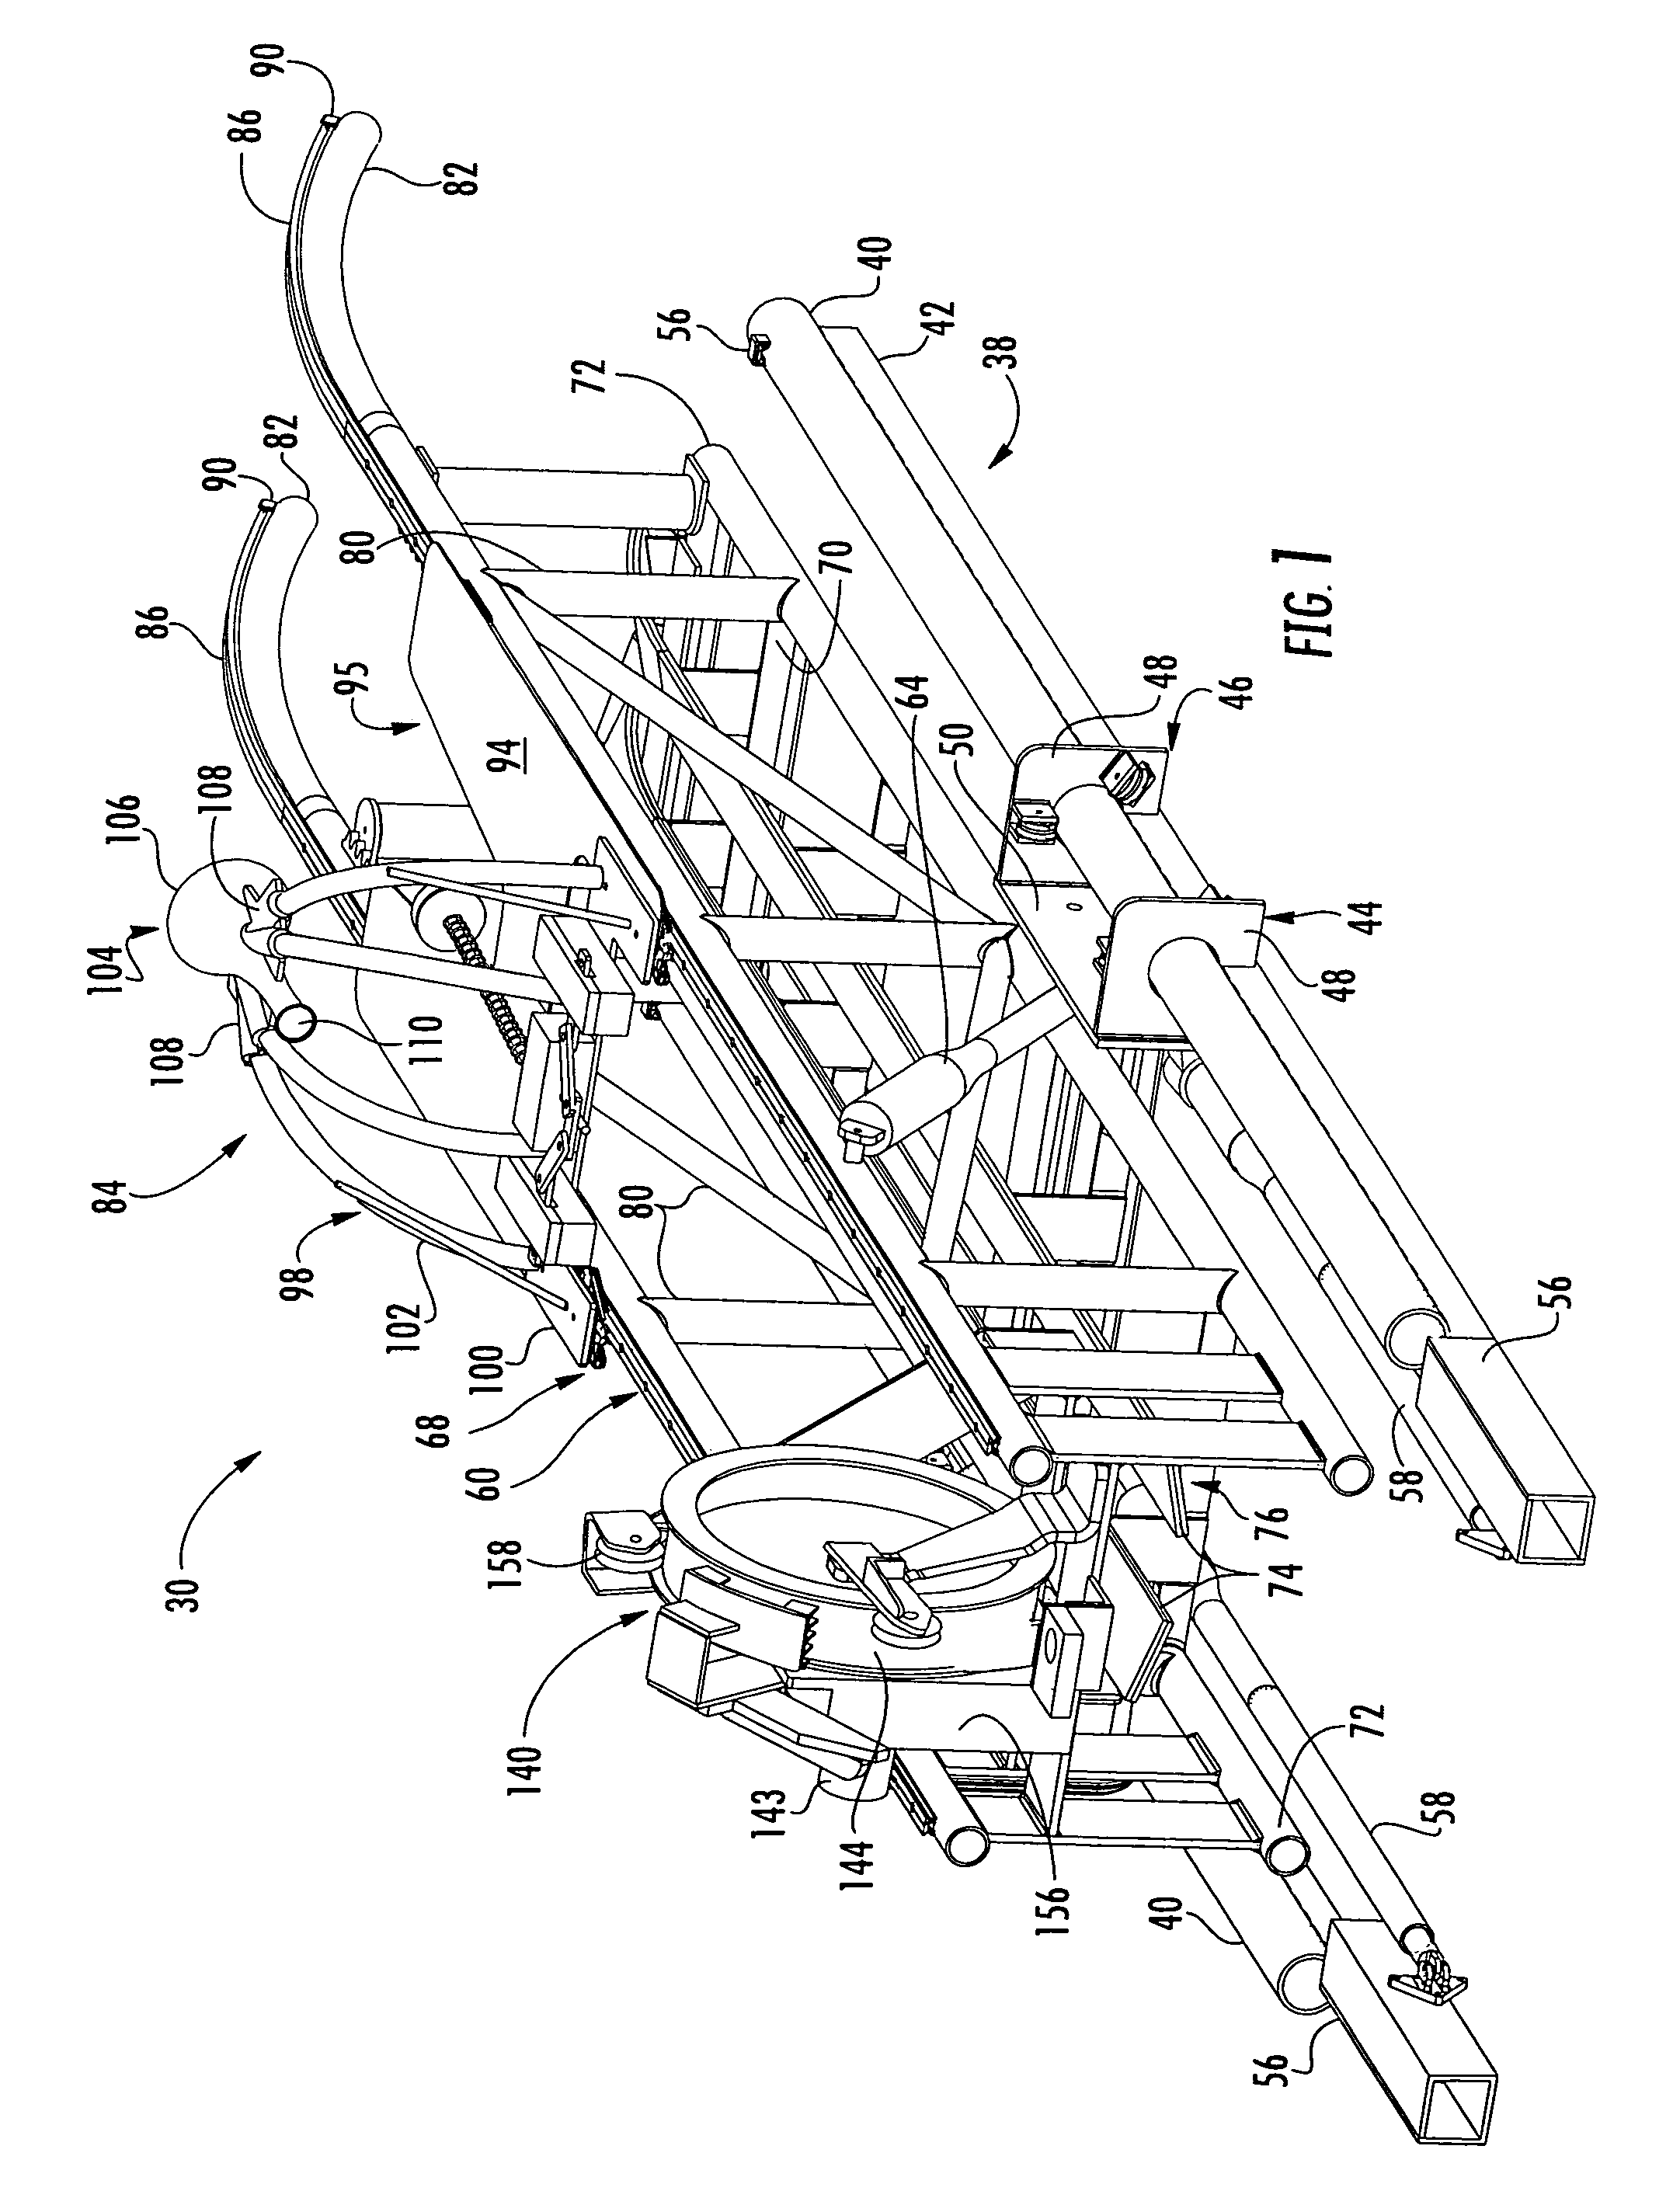 Launch and recovery systems and methods